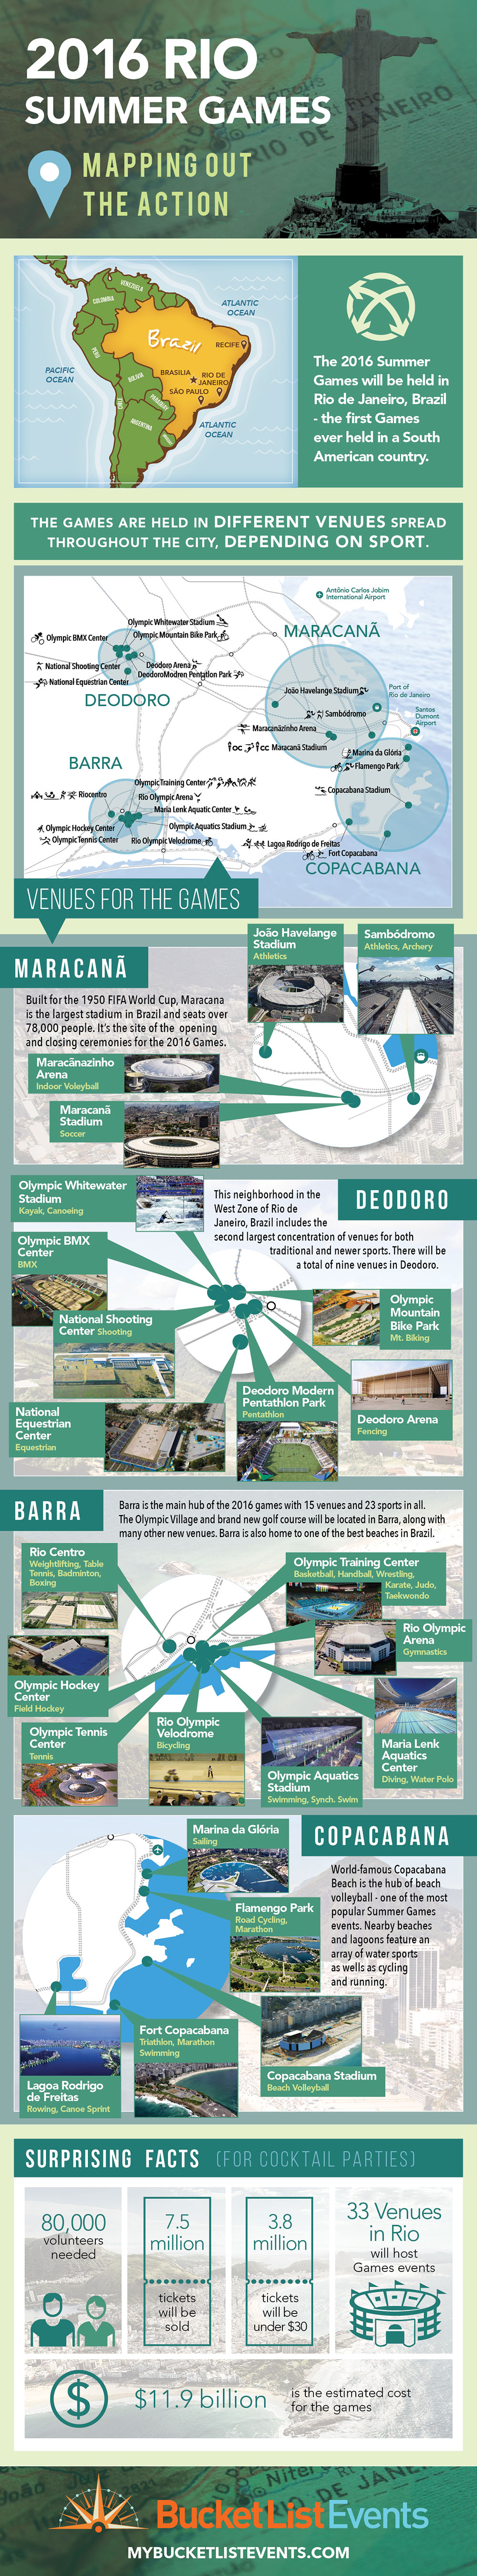 BLE_Rio_Summer_Games_Infographic